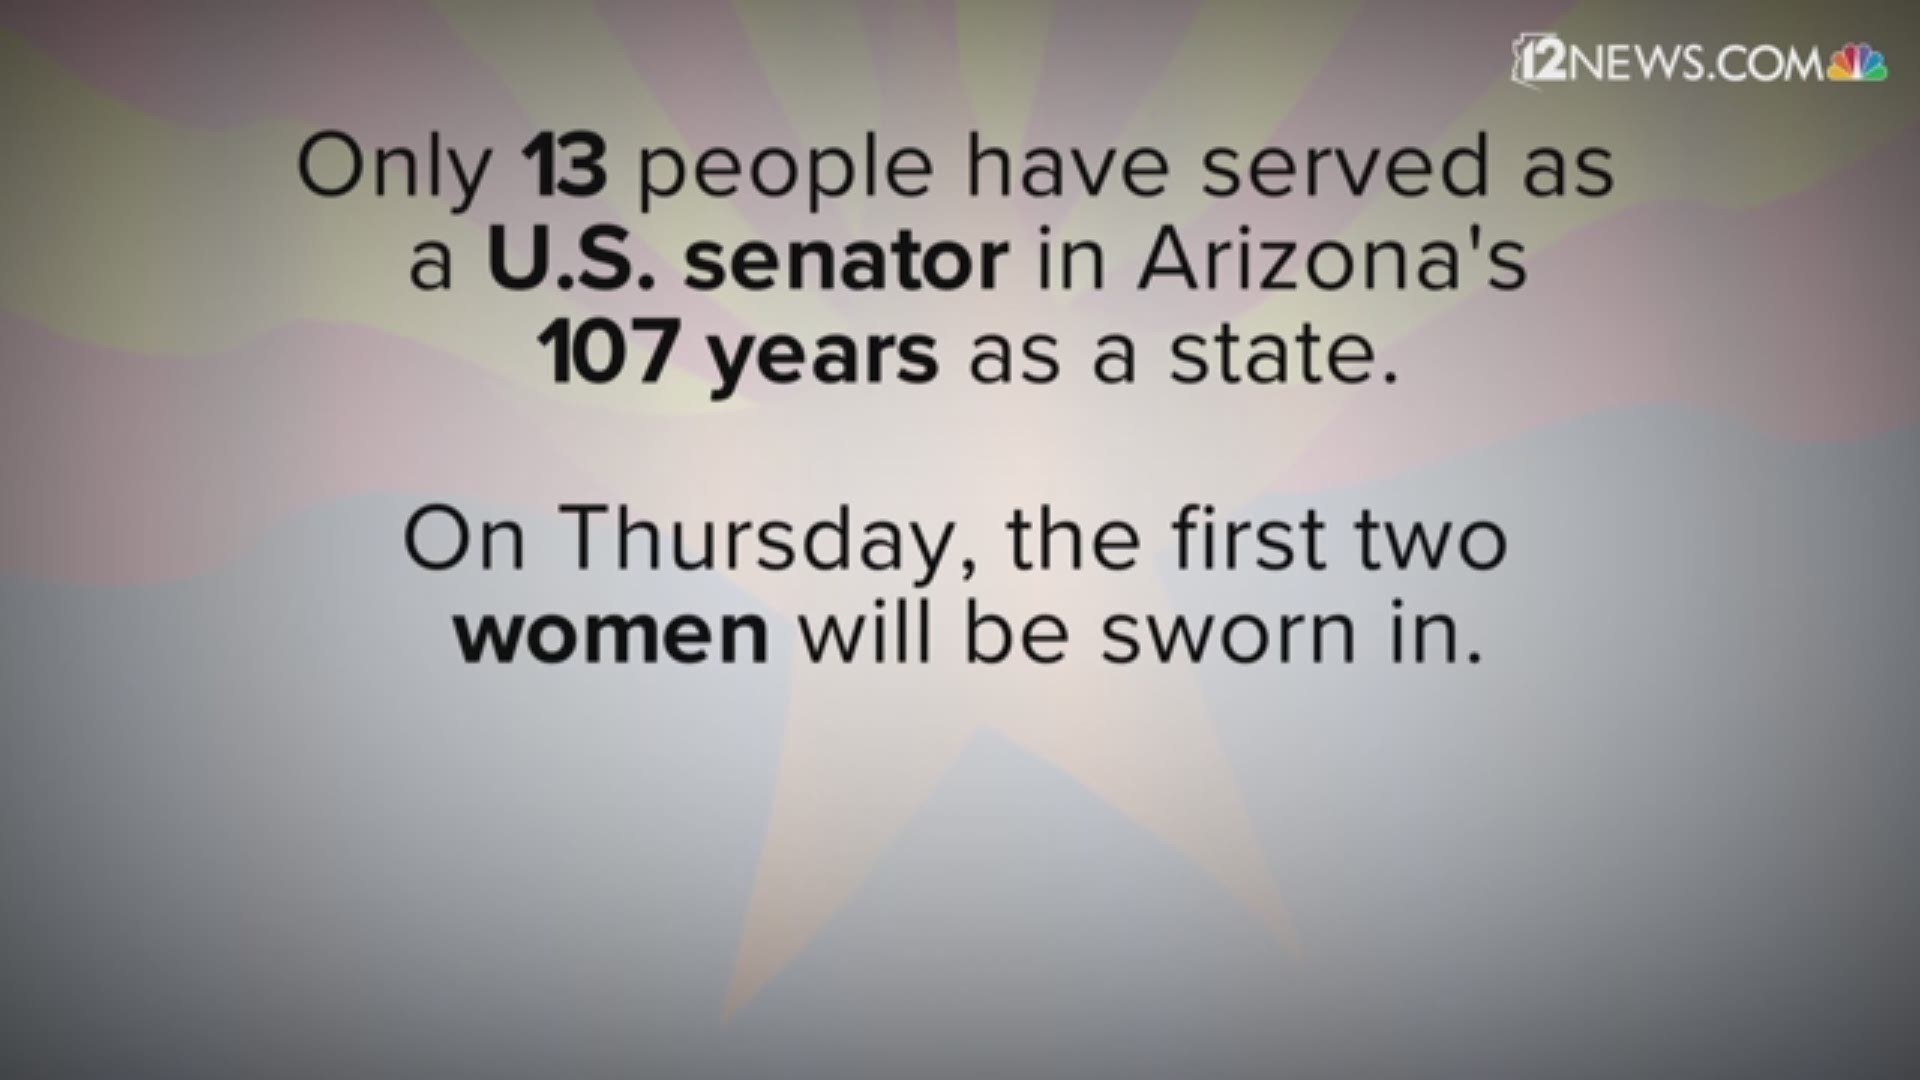 Sinema and McSally will bring Arizona's U.S. senator count up to 13 since it became a state in 1912.